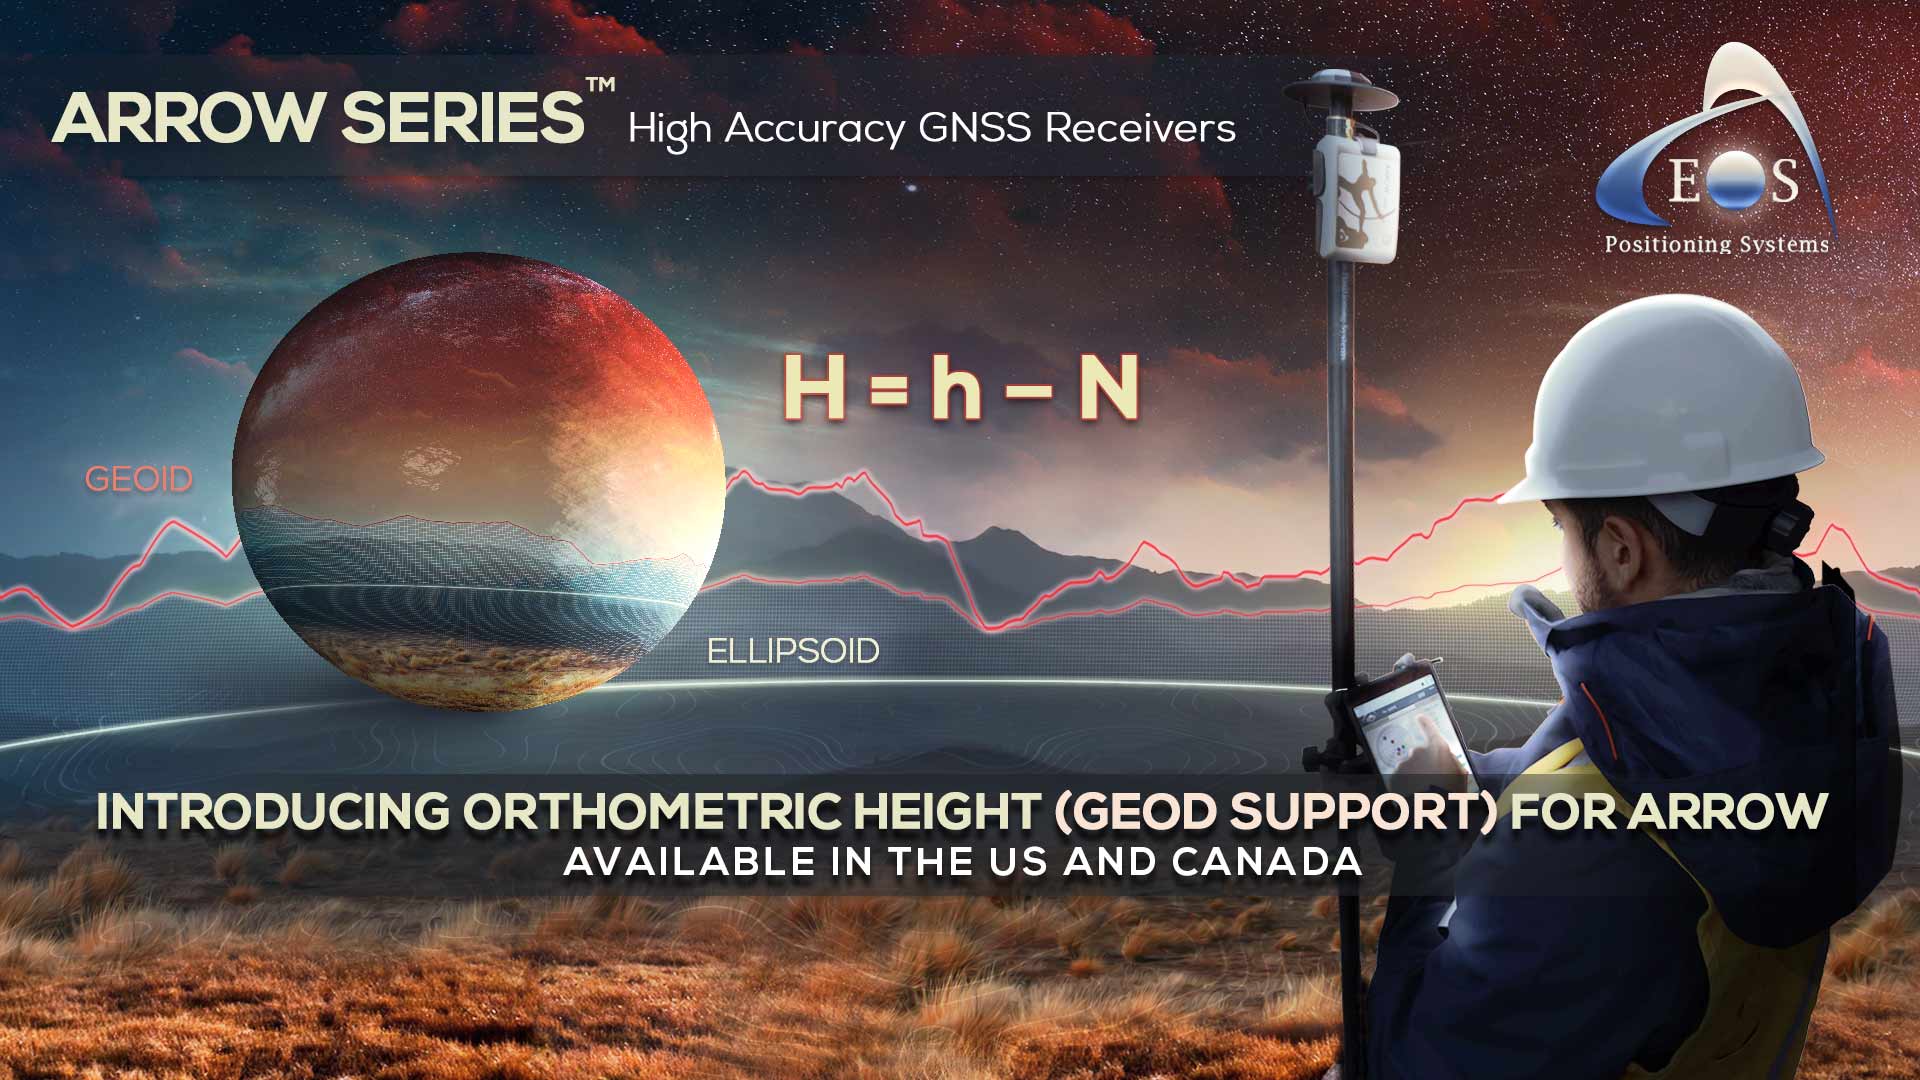 Eos Newsletter November 2018: GEOID height solution page